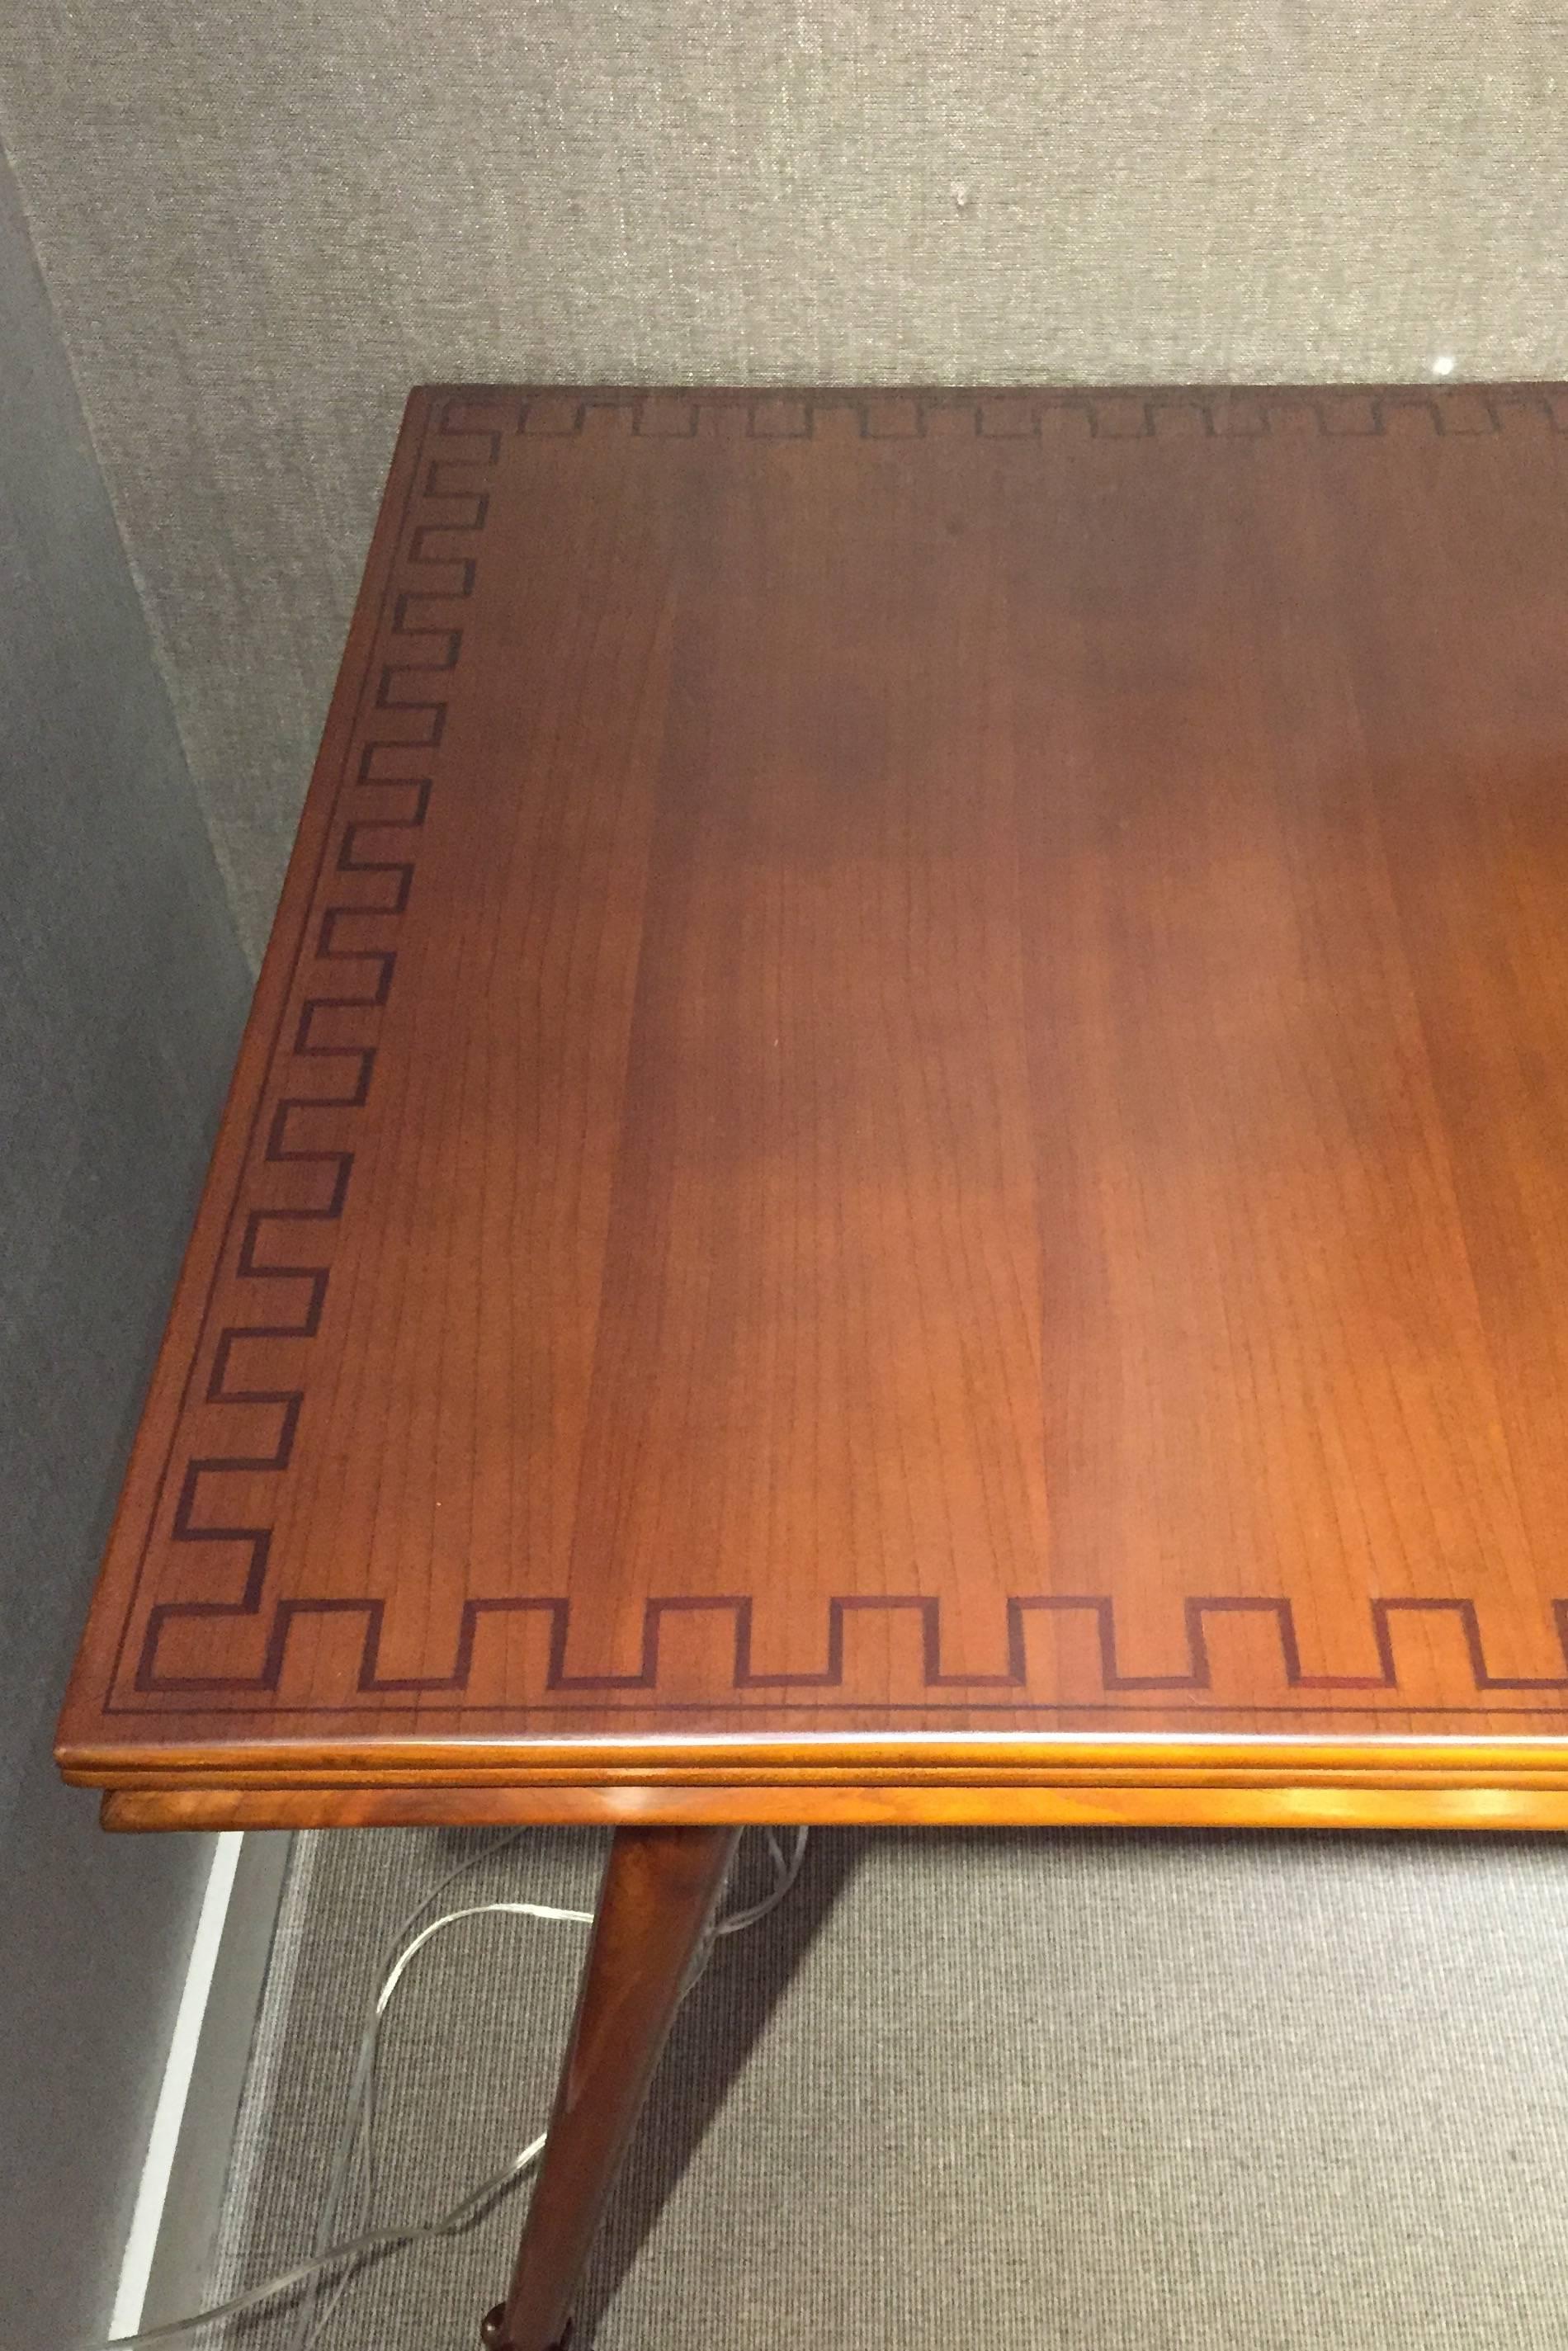 Rosewood and fruitwood. Rectangular table with a finely carved molding that runs the apron, raised on round and tapered legs, terminating in carved foliate feet. The table top is inlaid with a meandering pattern of tinted wood.

OUR REFERENCE